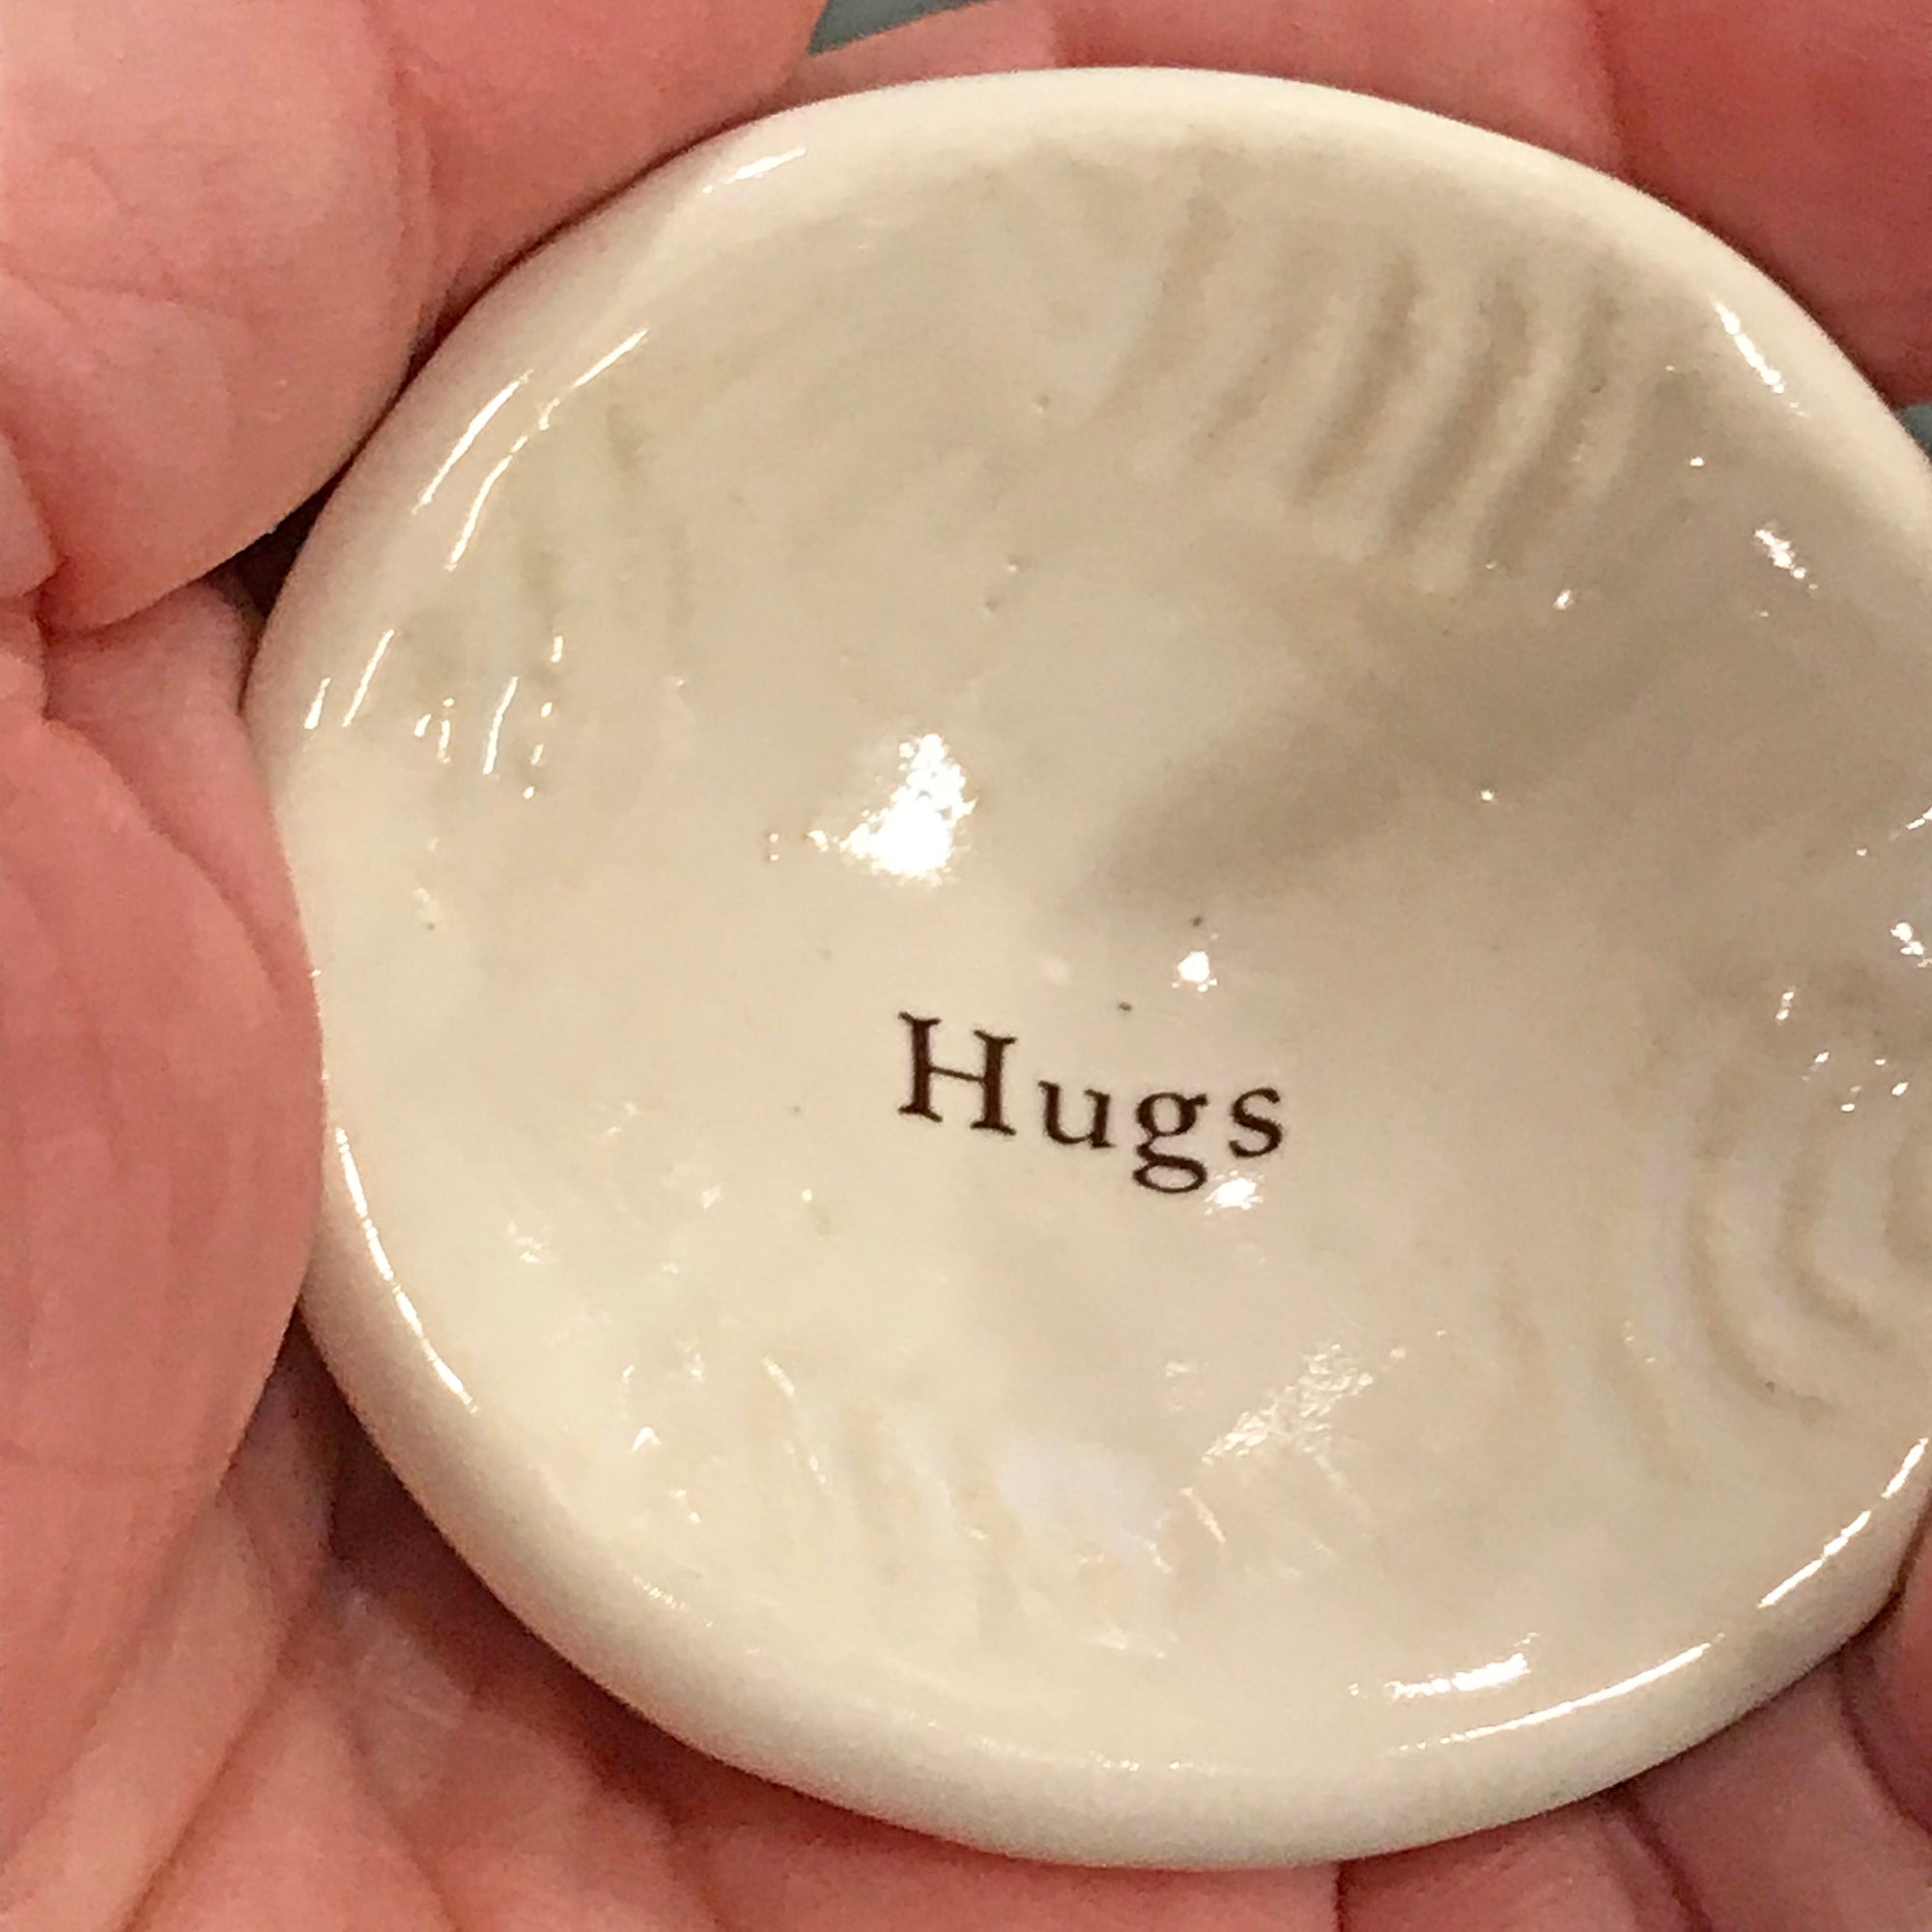 Giving Bowl with the word "Hugs" is a lovely way of showing your friendship and caring.